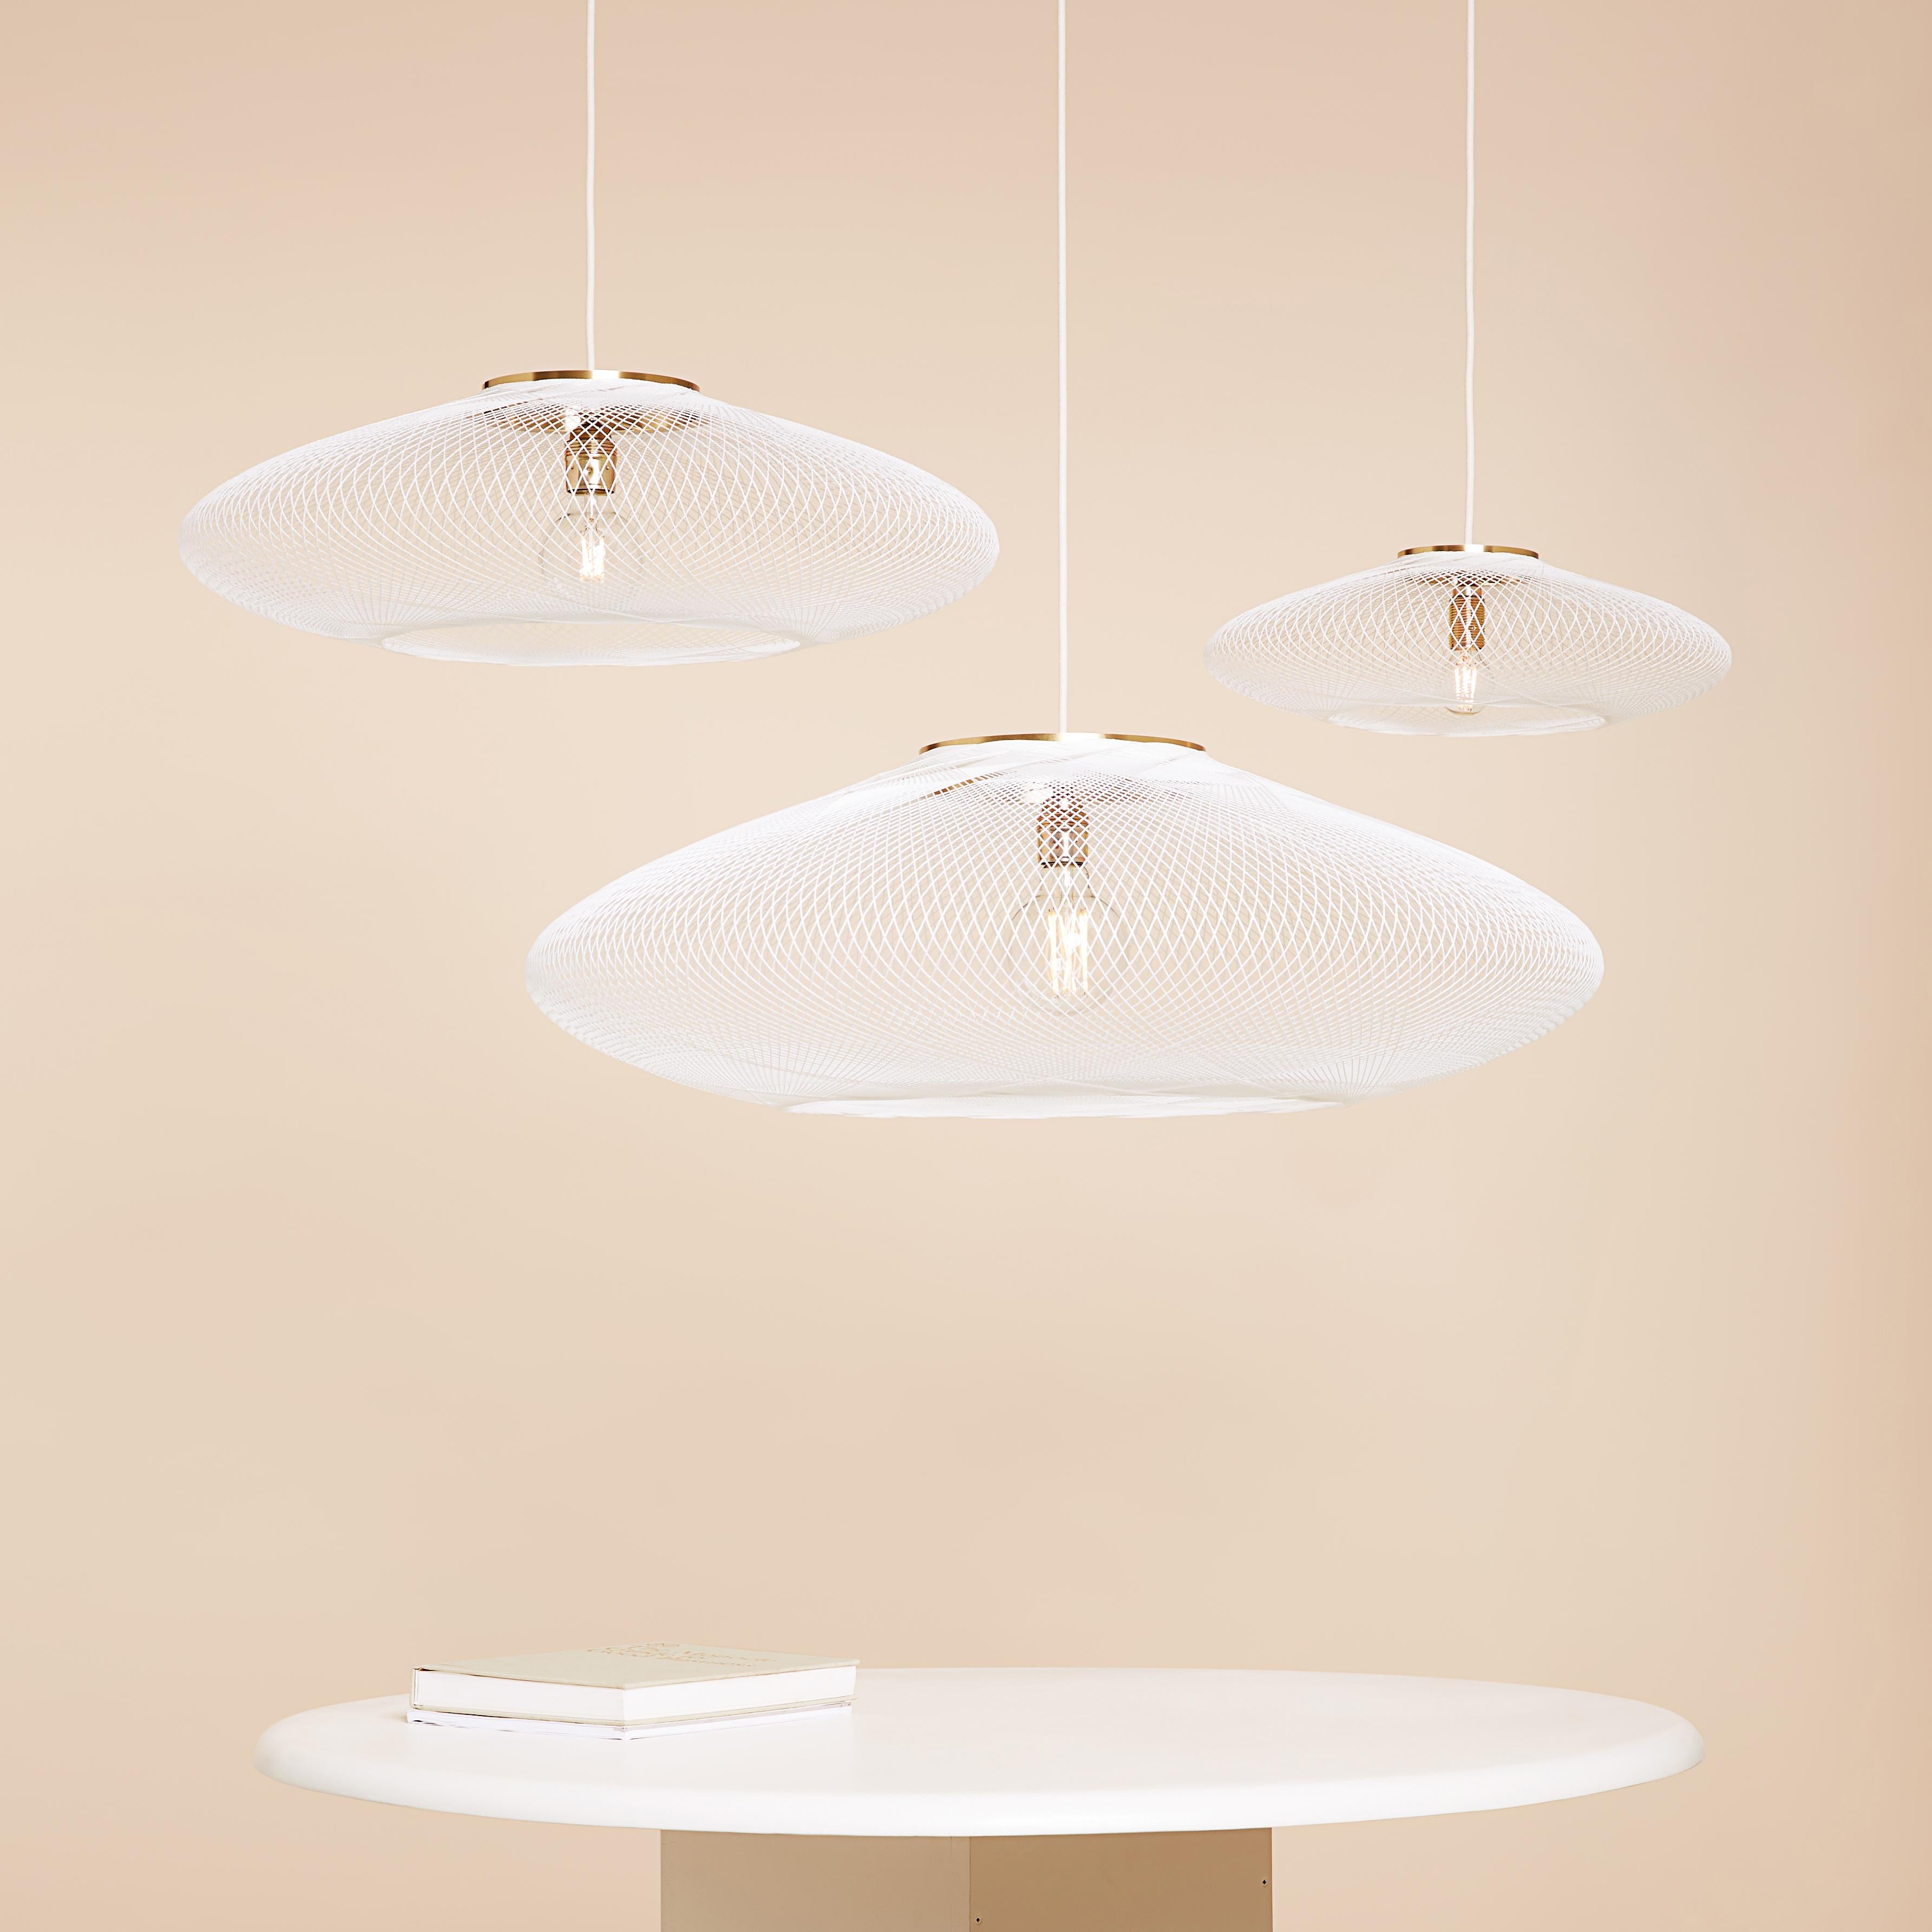 Medium White UFO pendant lamp by Atelier Robotiq
Dimensions: D 60 x H 18 cm
Materials: Resin-impregnated industrial fiber, brass.
Available with holder in copper/ brass/ black coated stainless steel.
Available in different colors, 3 sizes, and